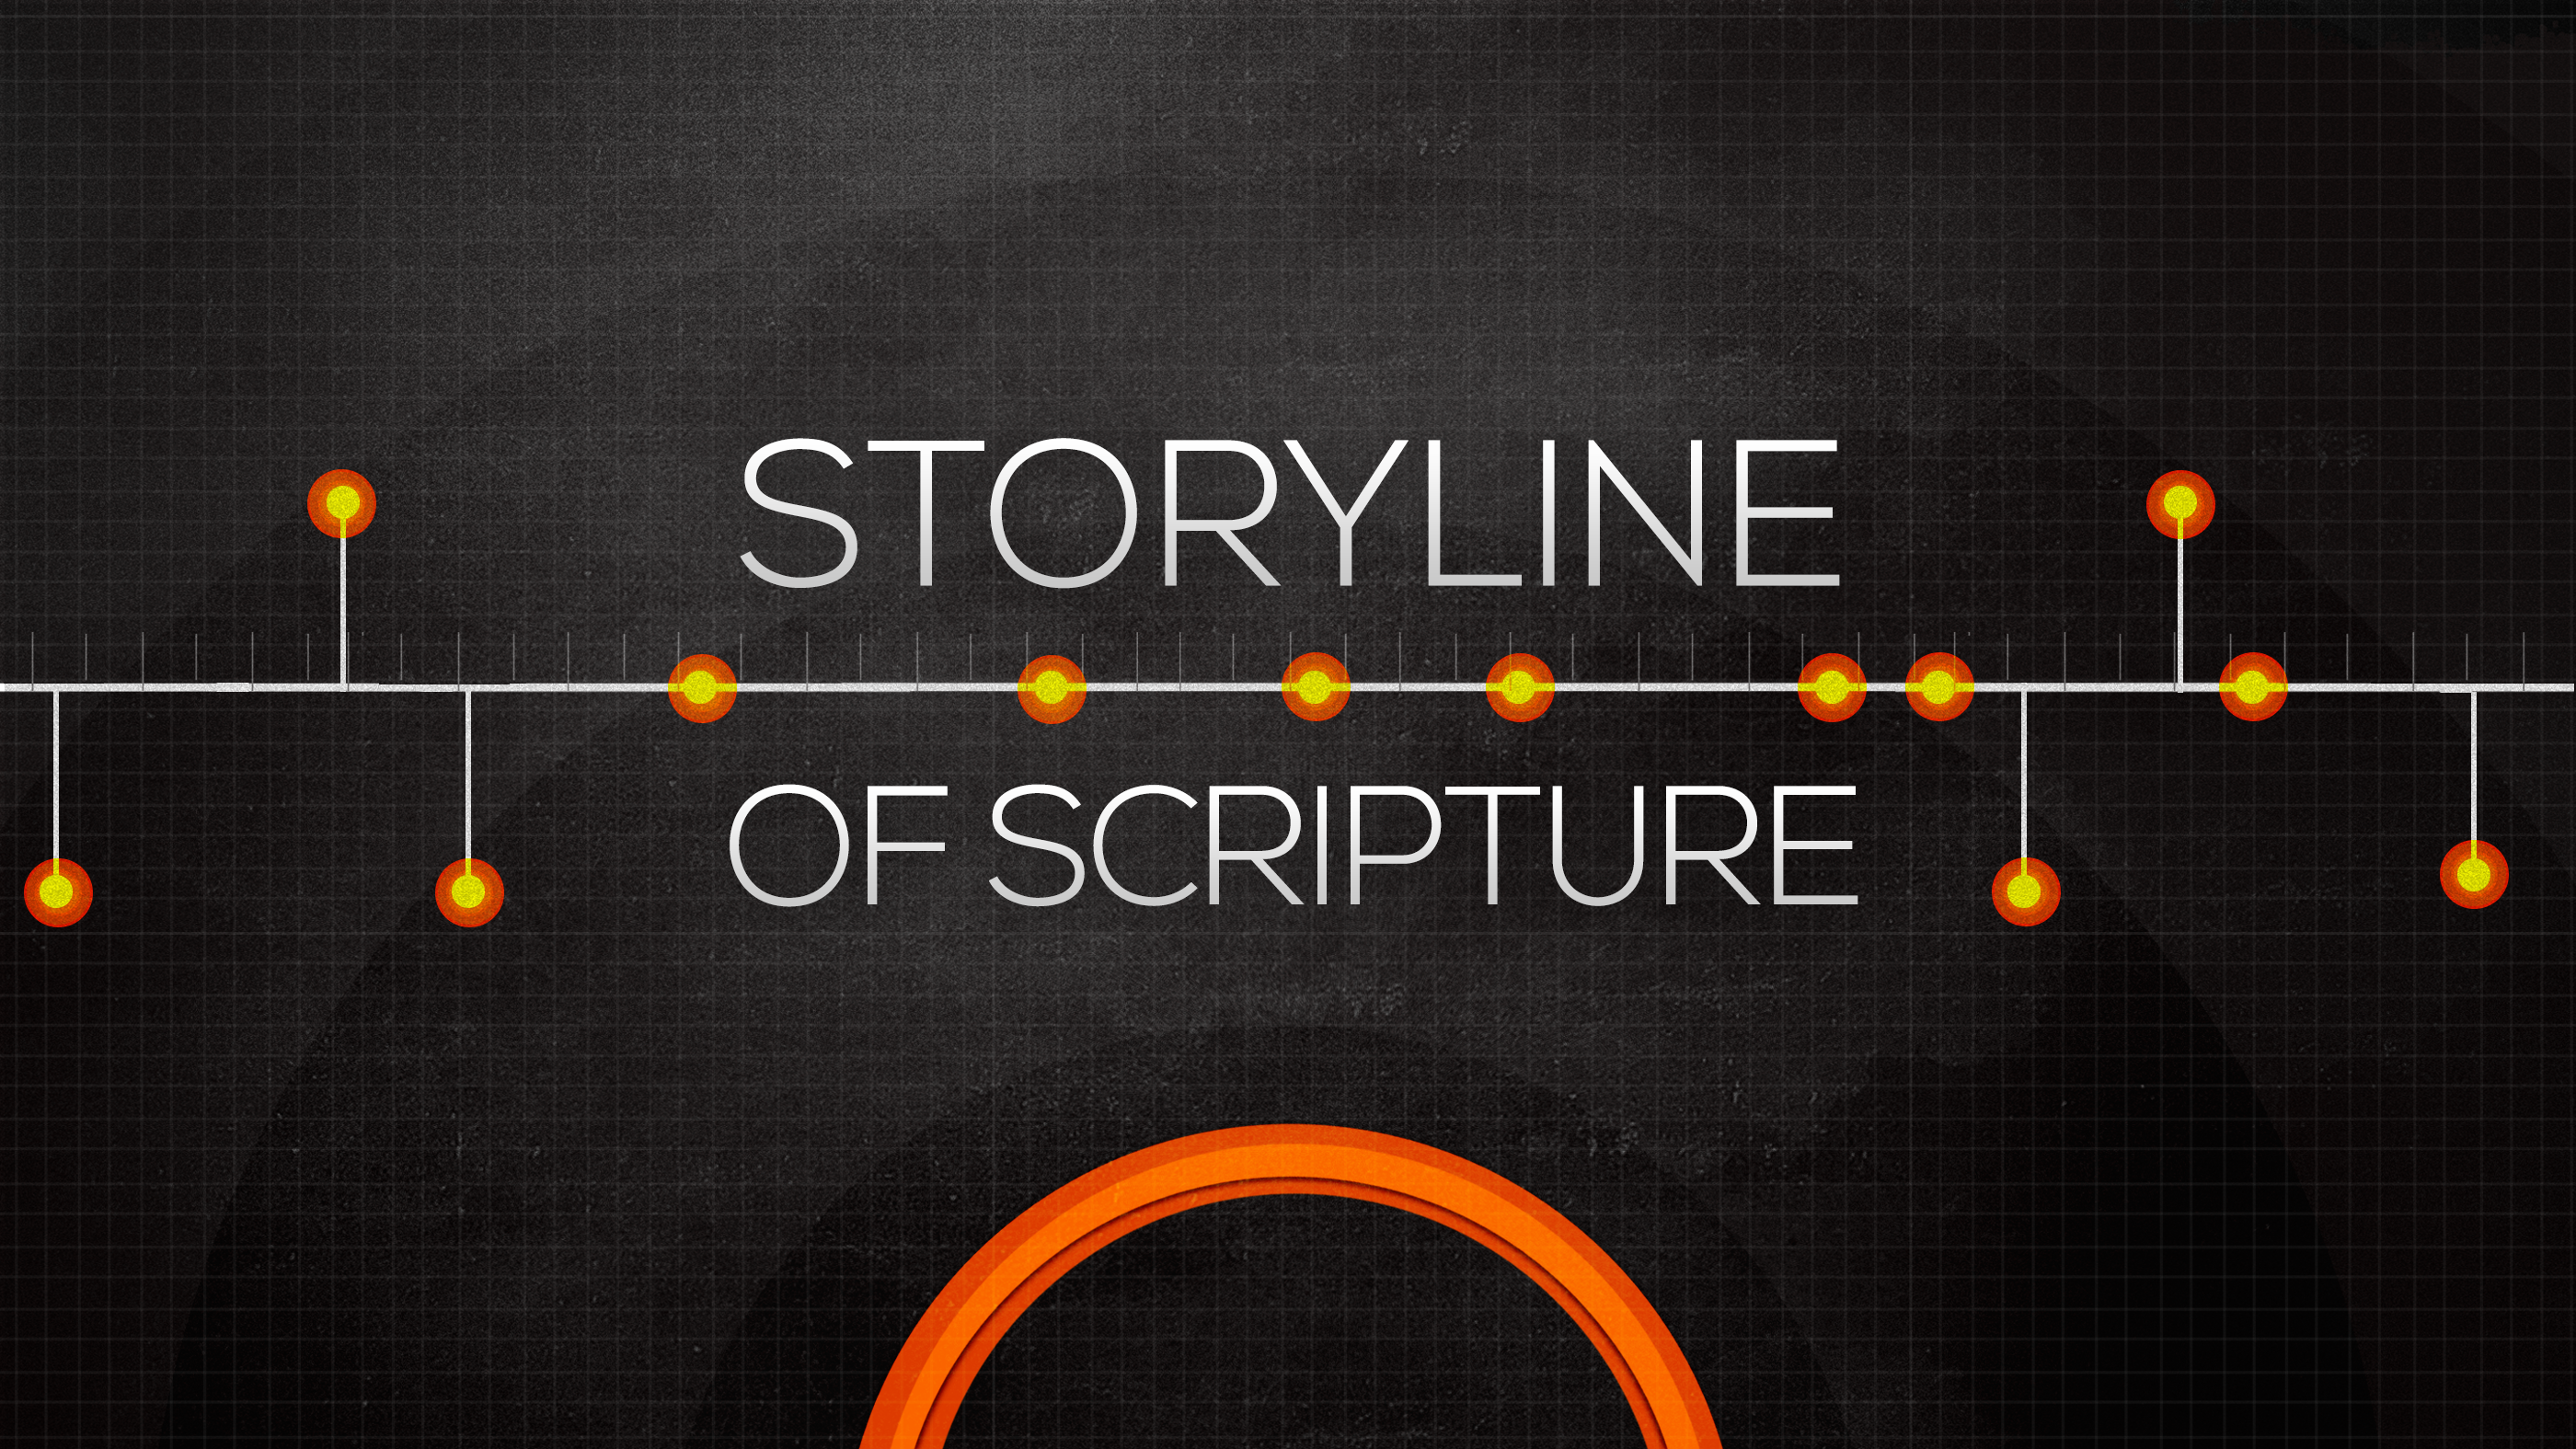 Storyline of Scripture - Exile & Homecoming